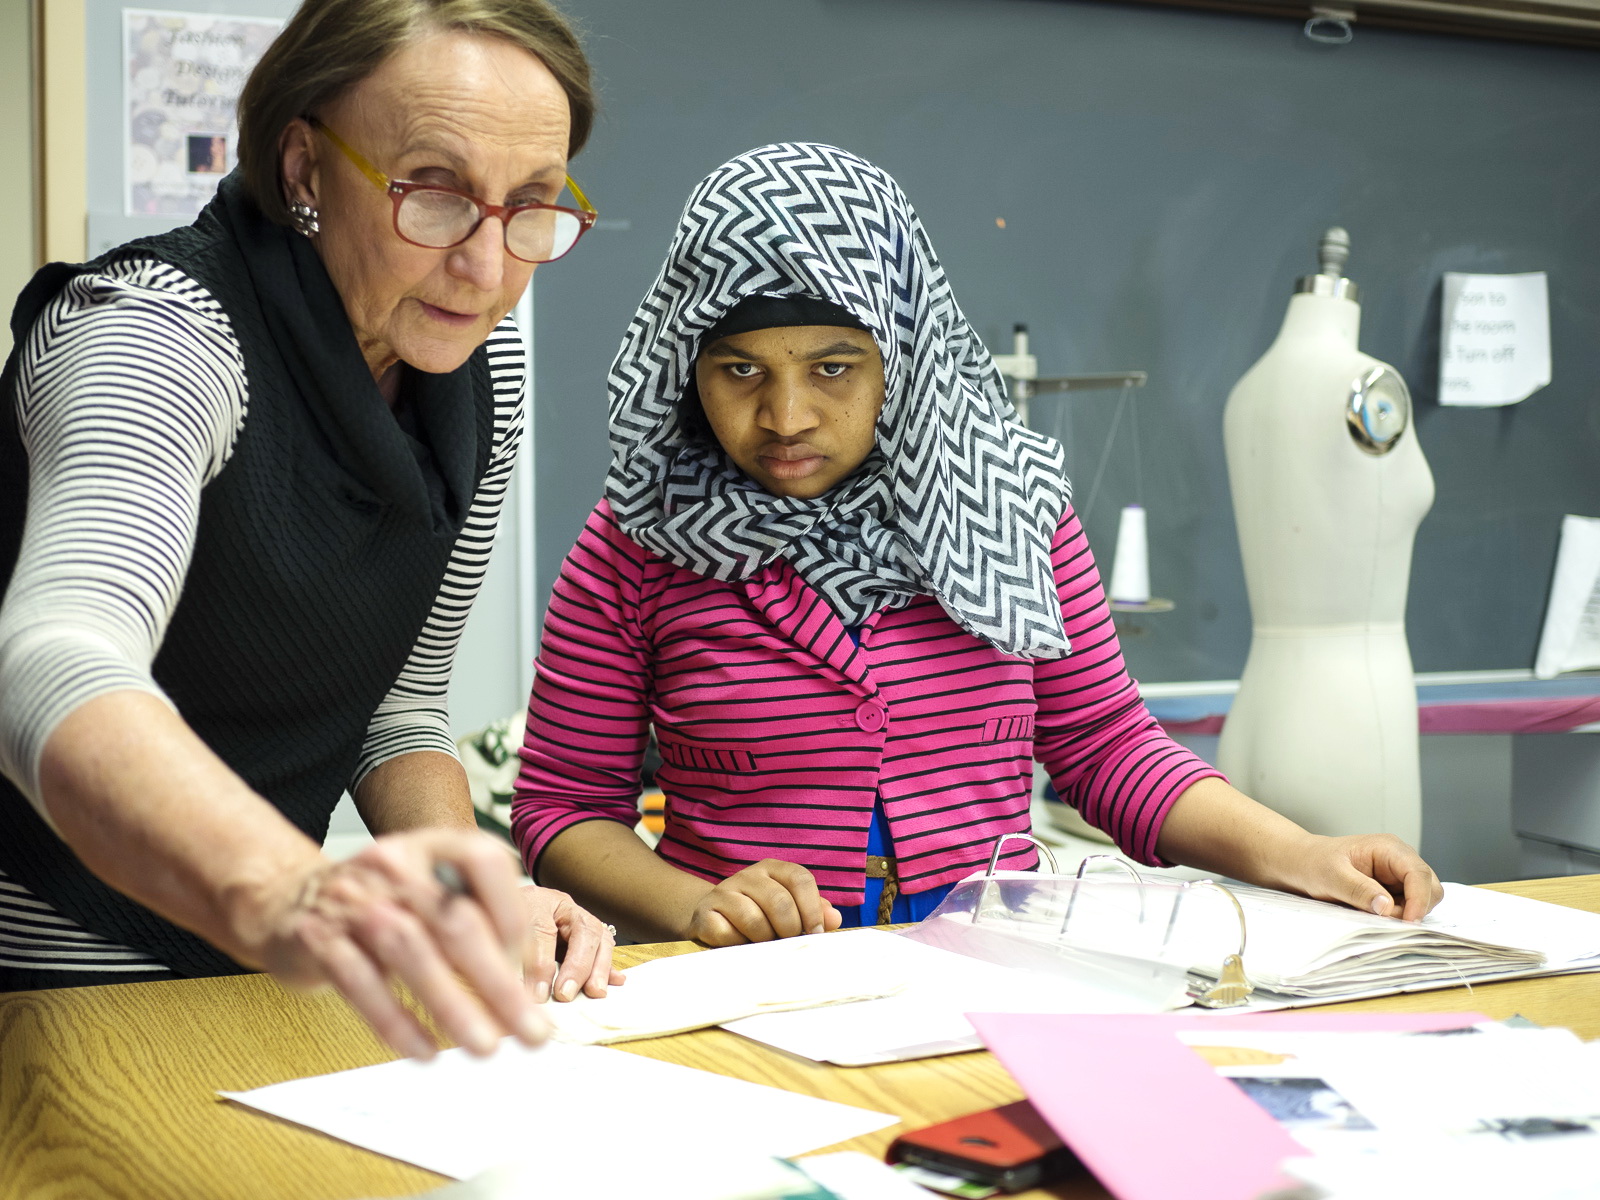 Hassan learned to sew at the Tree Street Youth after-school program, and as a freshman at Mount Ida College in Newton, Massachusetts, she honed skills in apparel construction under Jeanne McDavitt.